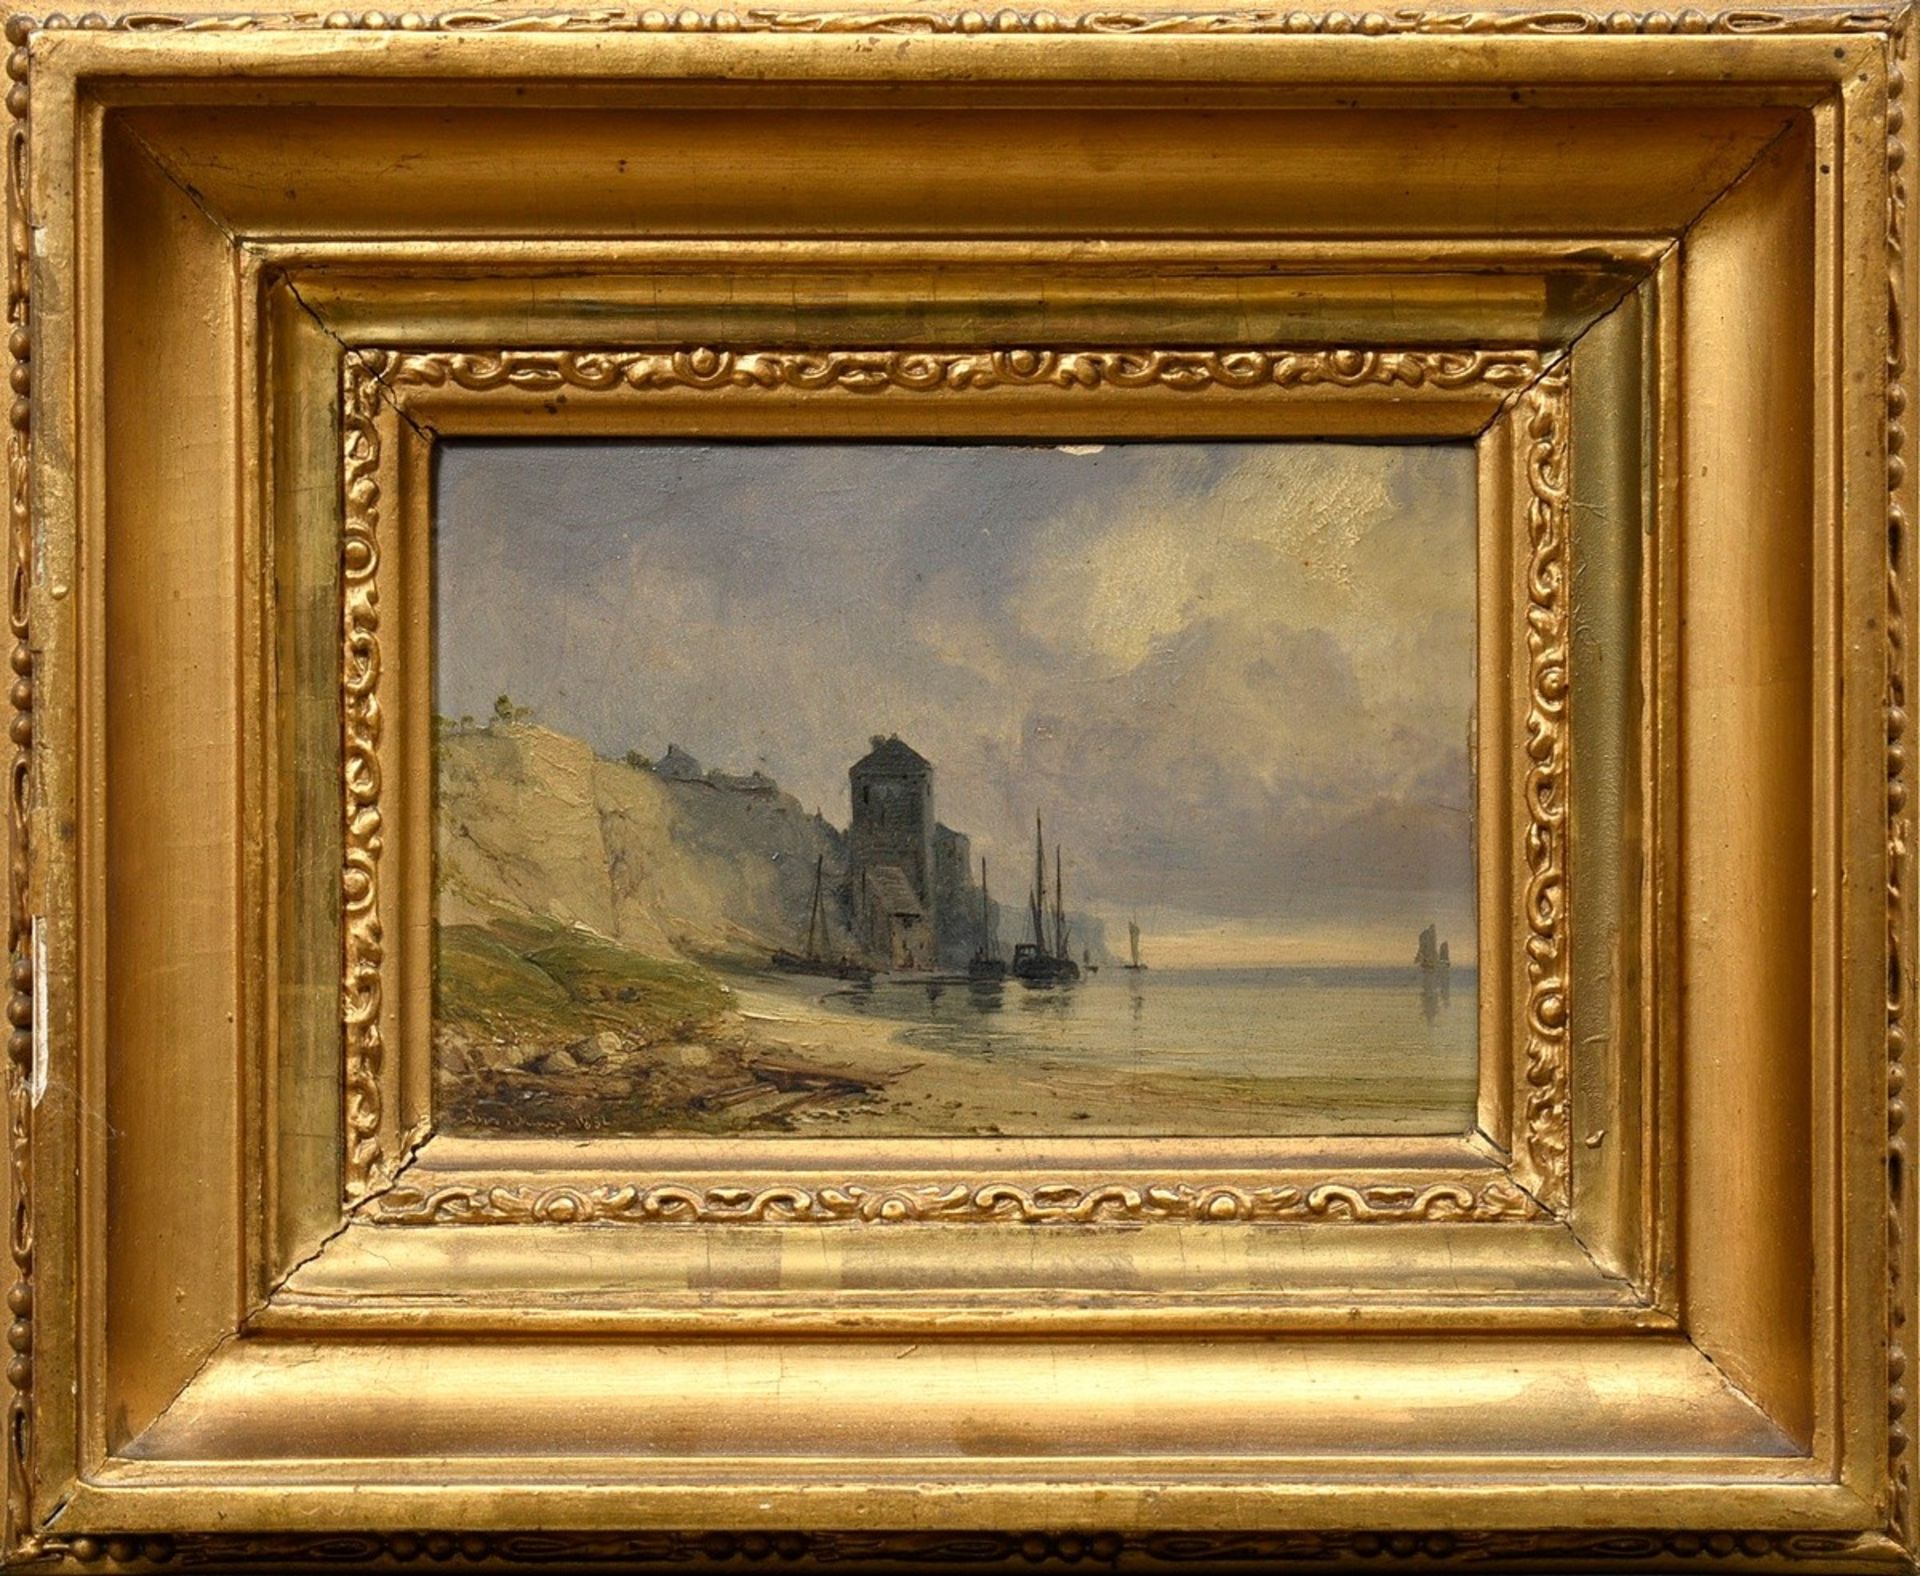 Unknown artist of the 19th c. "Ships on a cliff" 1852, oil/plate, illegible sign./dat. lower left,  - Image 2 of 4